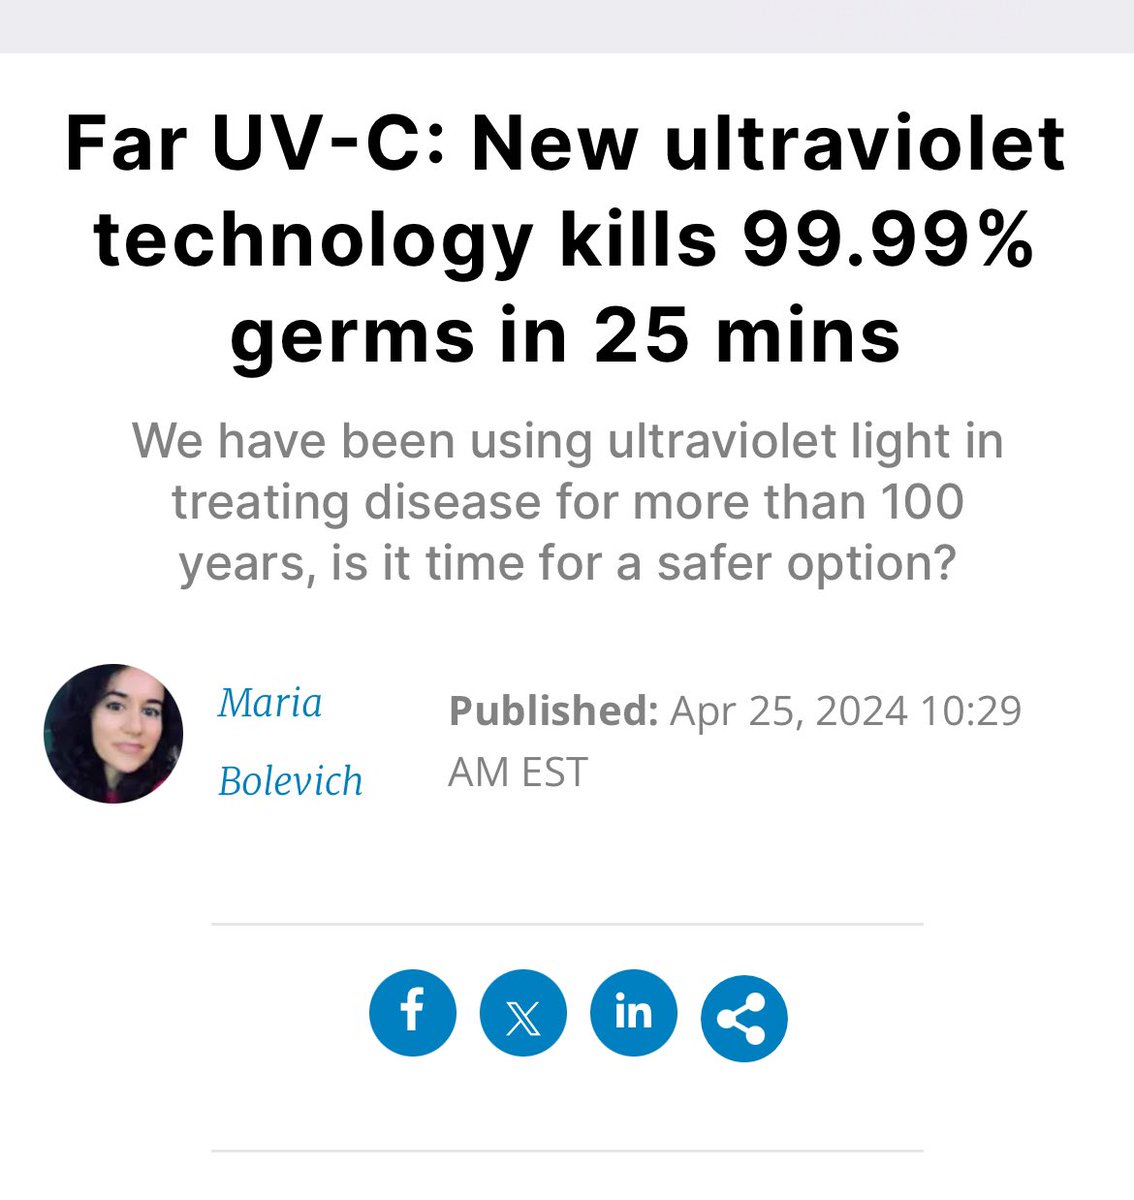 New Article on the benefits of Far UVC in inactivating germs & viruses. 

Article: interestingengineering.com/news/new-ultra…

#faruvc #222nm #cleanair #COVID19